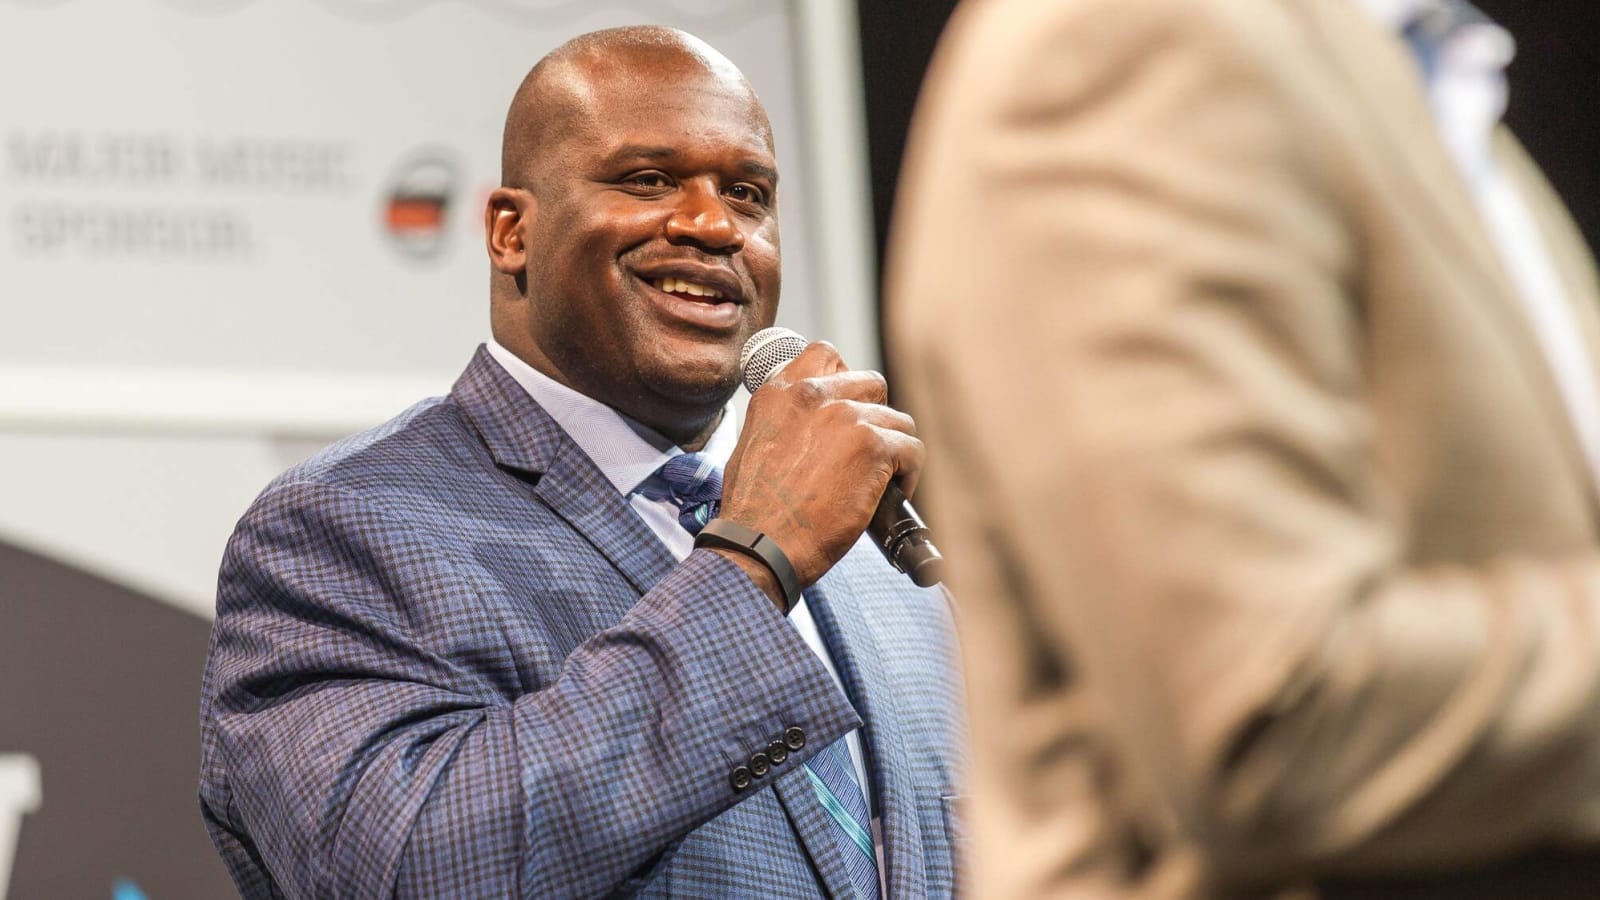 'Thank you Michael Jordan!' Shaquille O’Neal hilariously snaps at Charles Barkley for not winning rings in latest rant